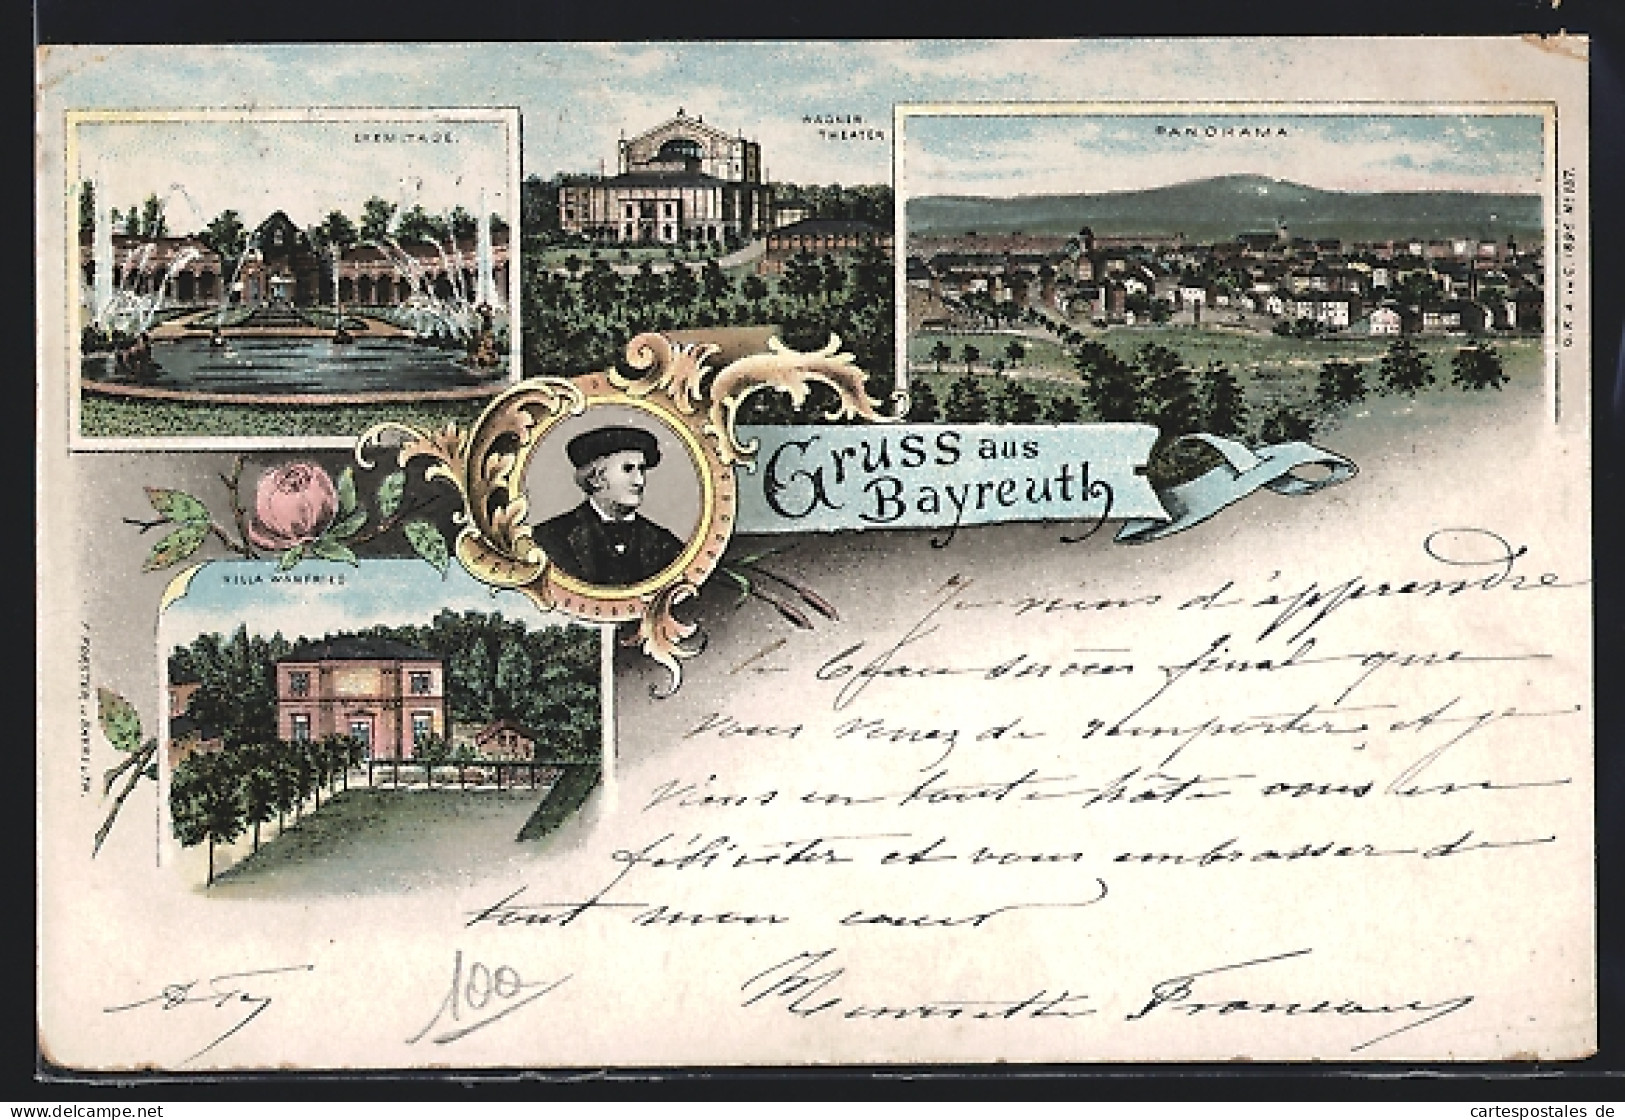 Lithographie Bayreuth, Wagner-Theater, Villa Wanfried, Eremitage, Panorama  - Theatre